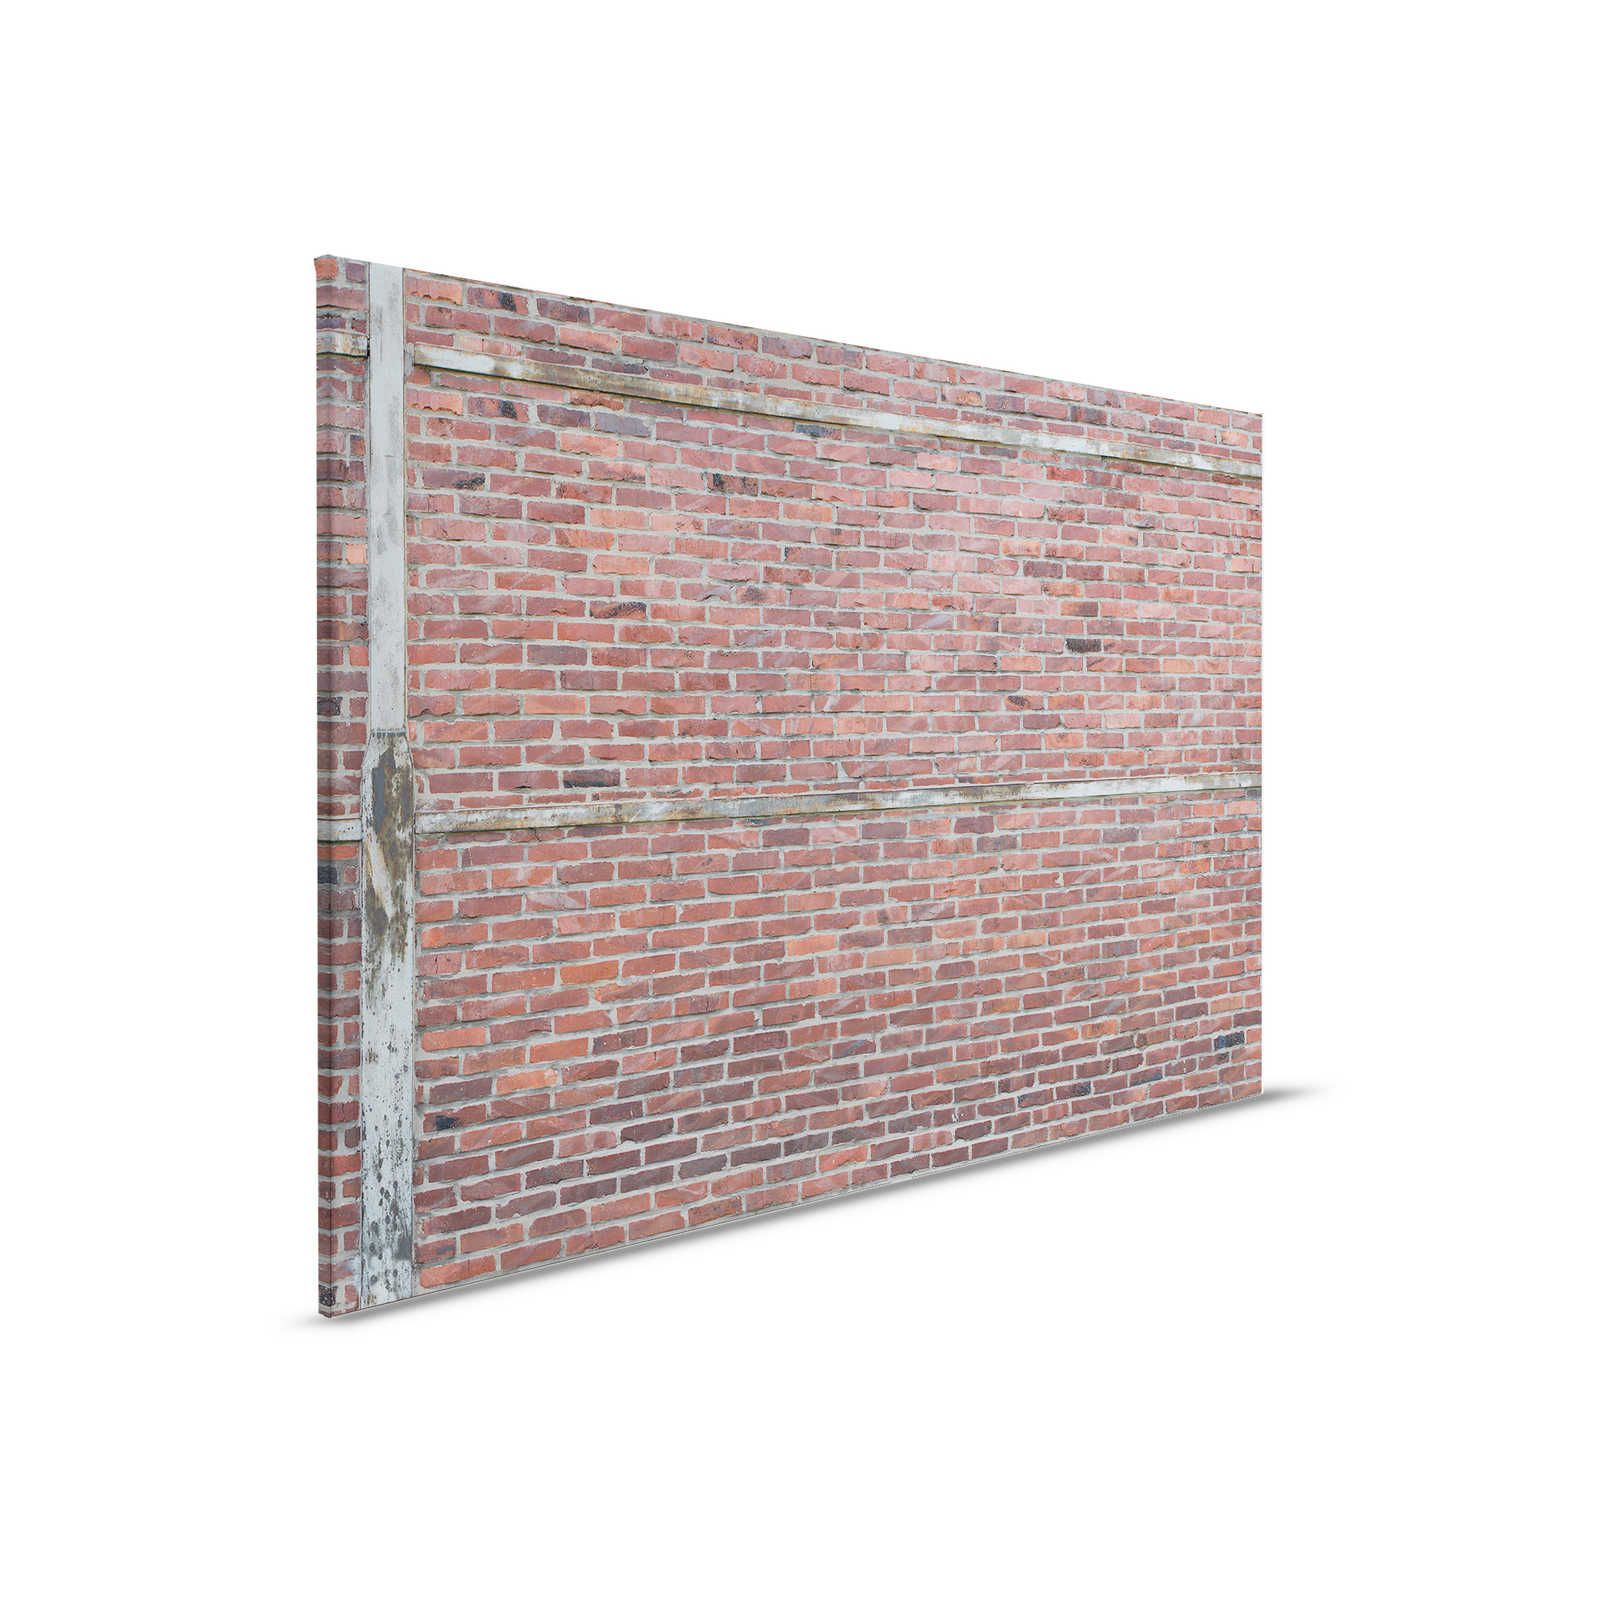         Canvas painting red brick wall in stone look - 0,90 m x 0,60 m
    